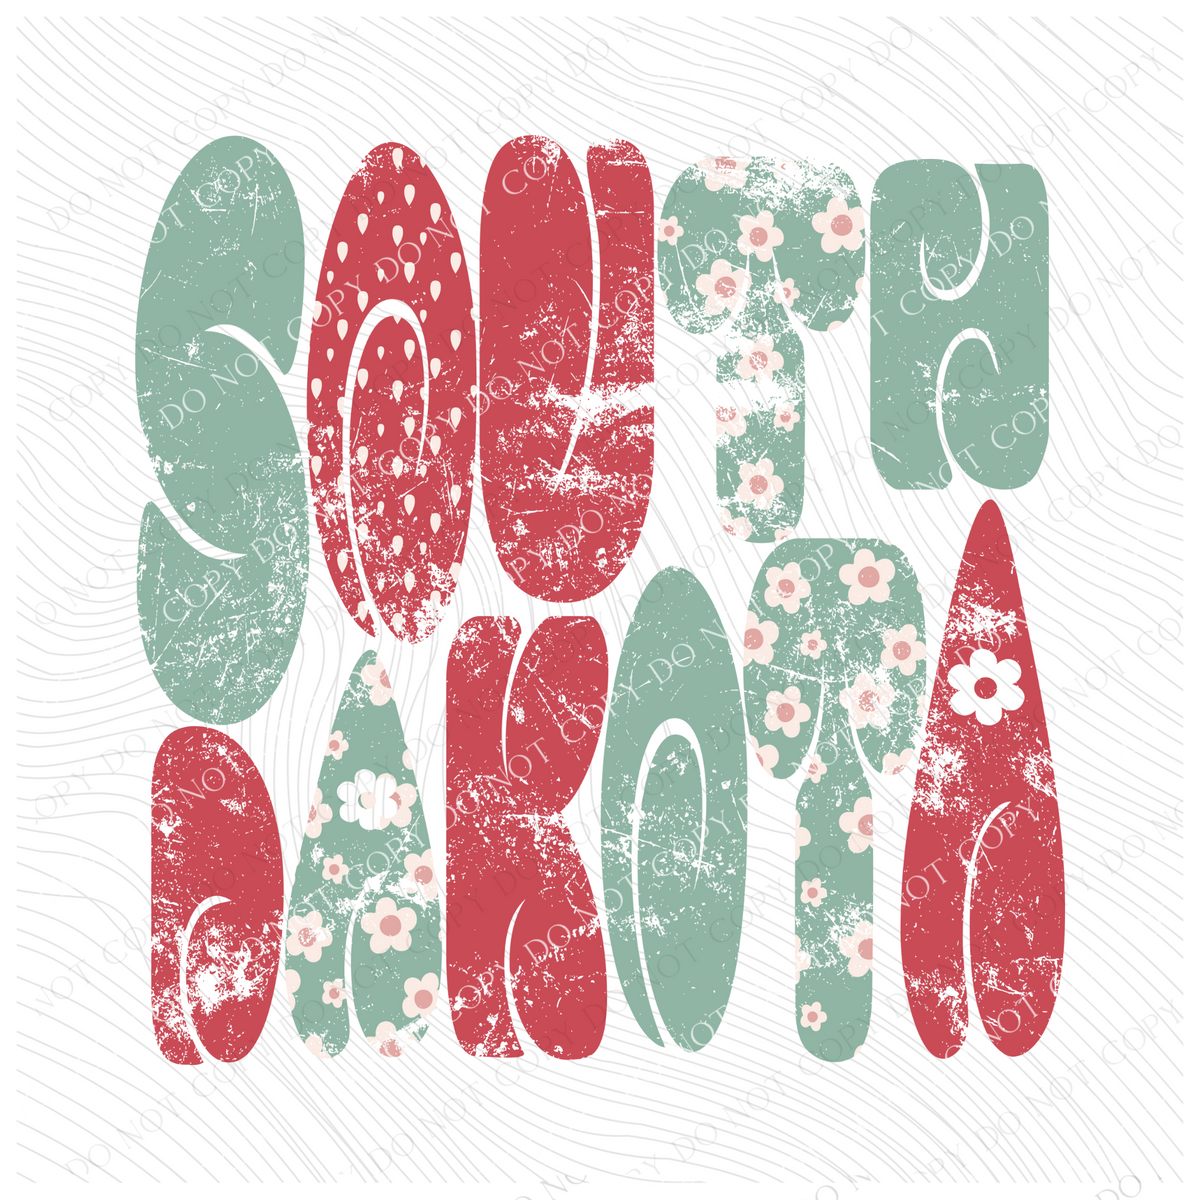 South Dakota Chubby Retro Distressed Daisies in tones of Greens & Reds Digital Design, PNG